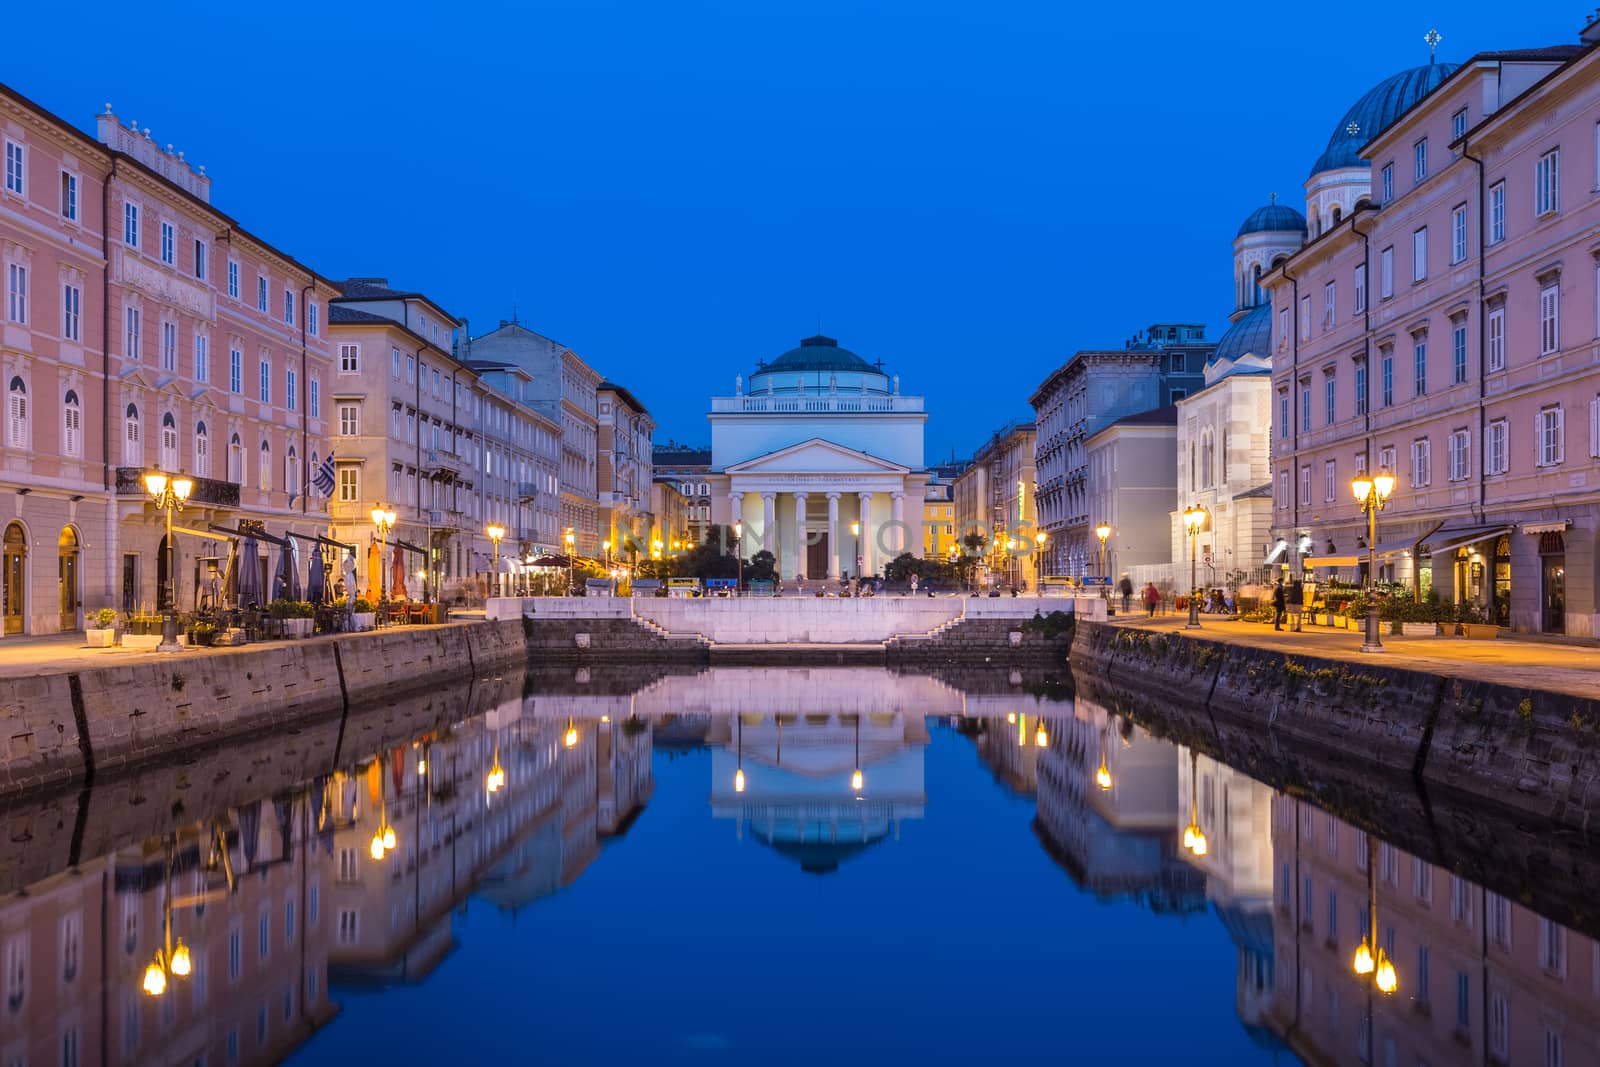 The huge church of St. Antonio Thaumaturgo is situated at the northern end of the Canale Grande. Its neo classical front facade and the cupola represents one of the emblems of the Trieste, city and seaport in northeastern Italy, Europe.